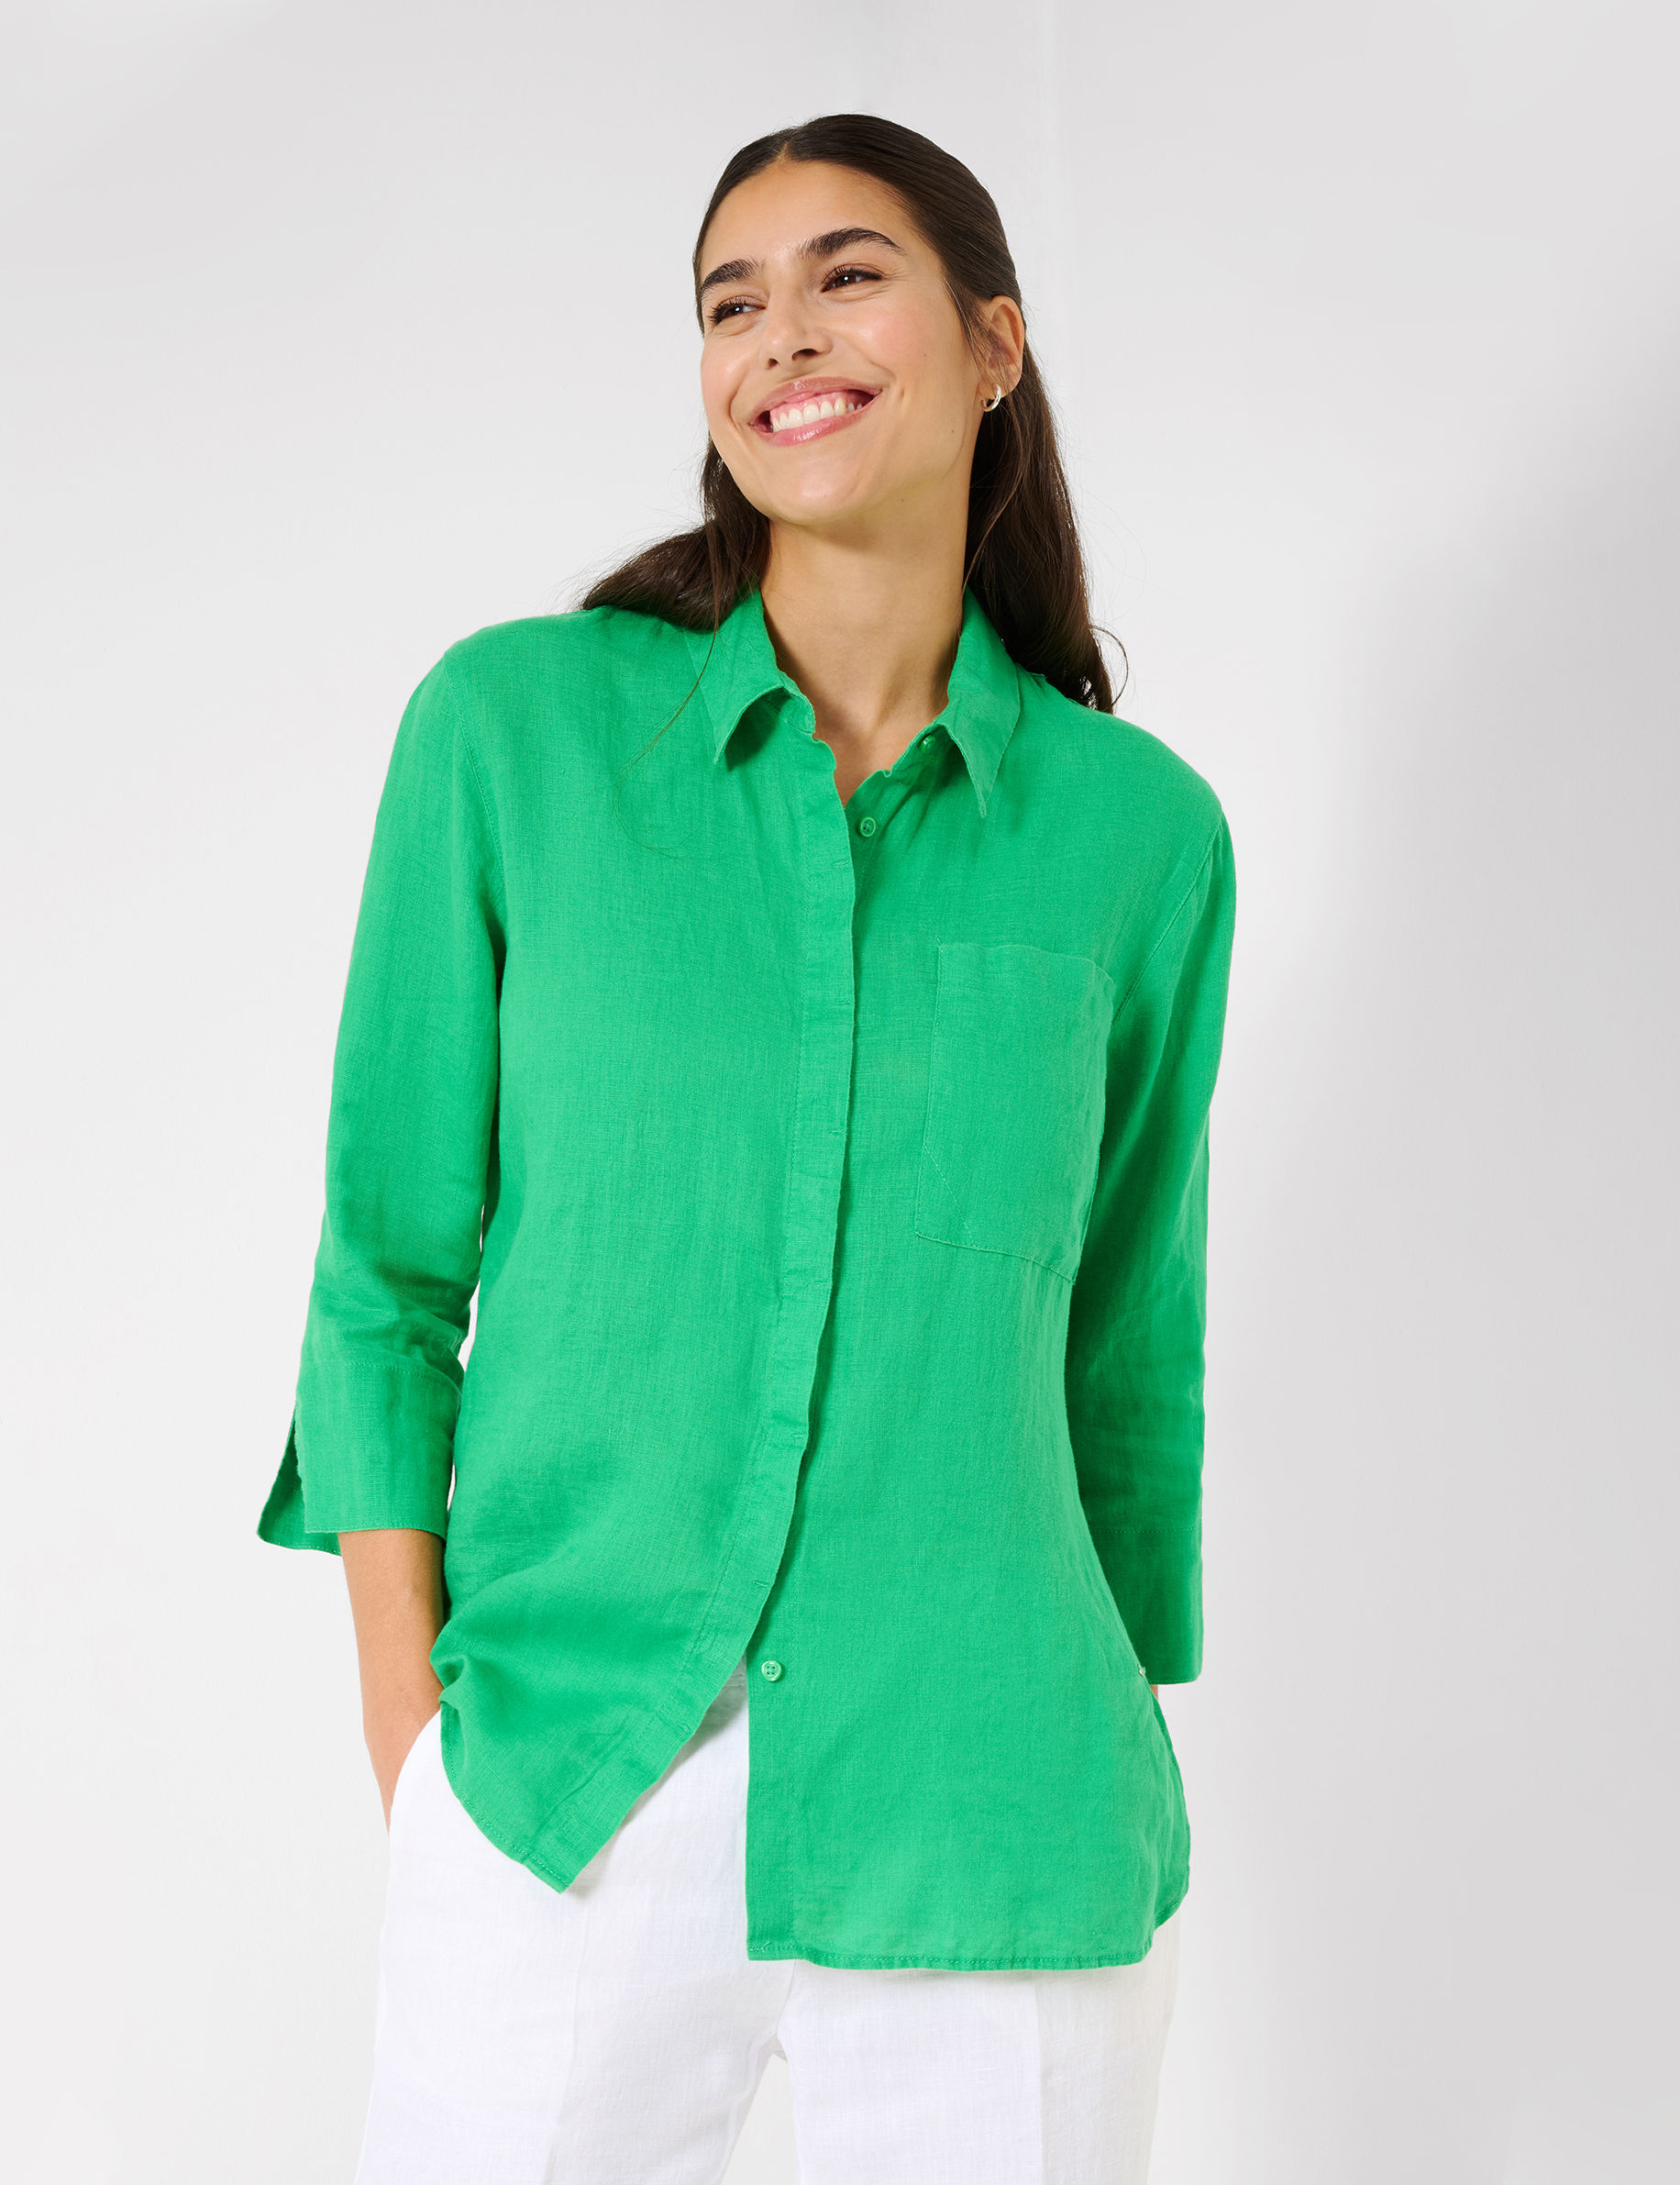 Shades of green, Women, Style VICKI, MODEL_FRONT_ISHOP